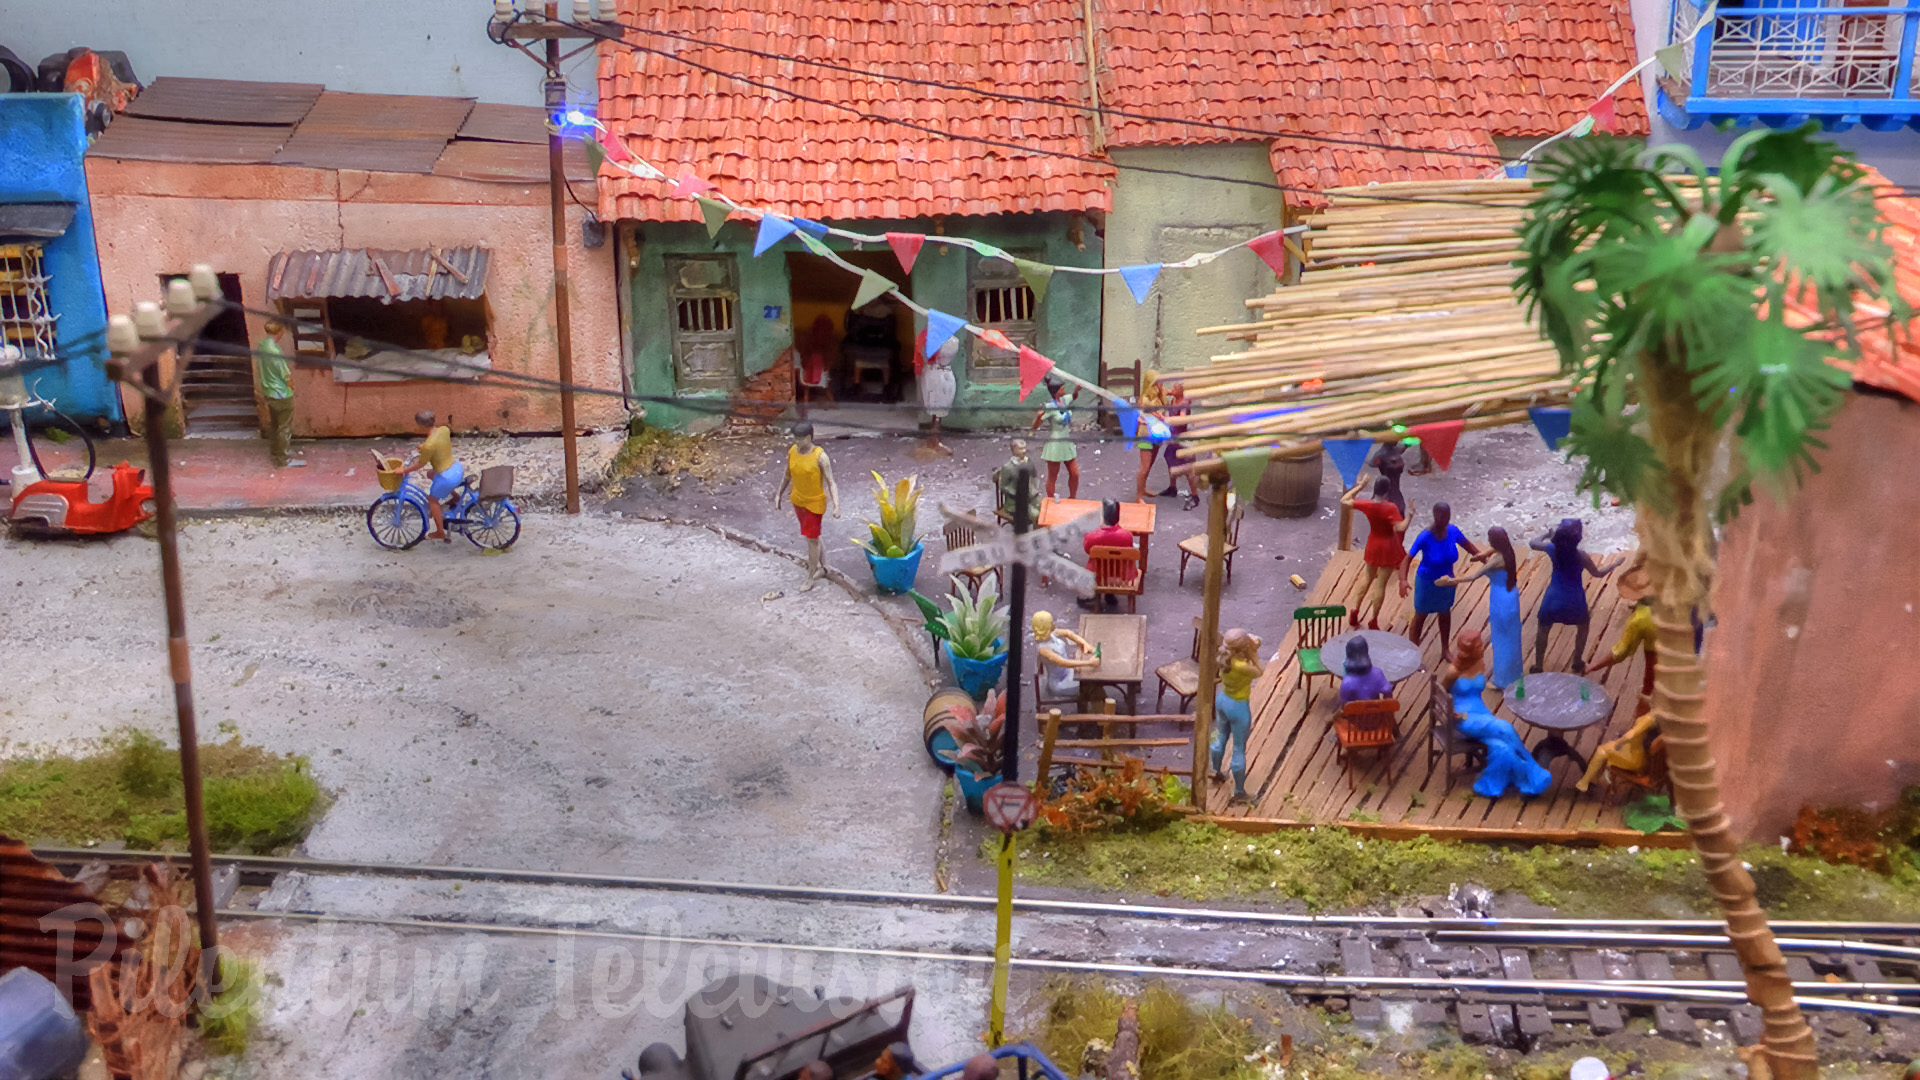 Model Railroad Diorama of Cuba - Scratch Building and Railway Modelling at its Best - On30 Layouts